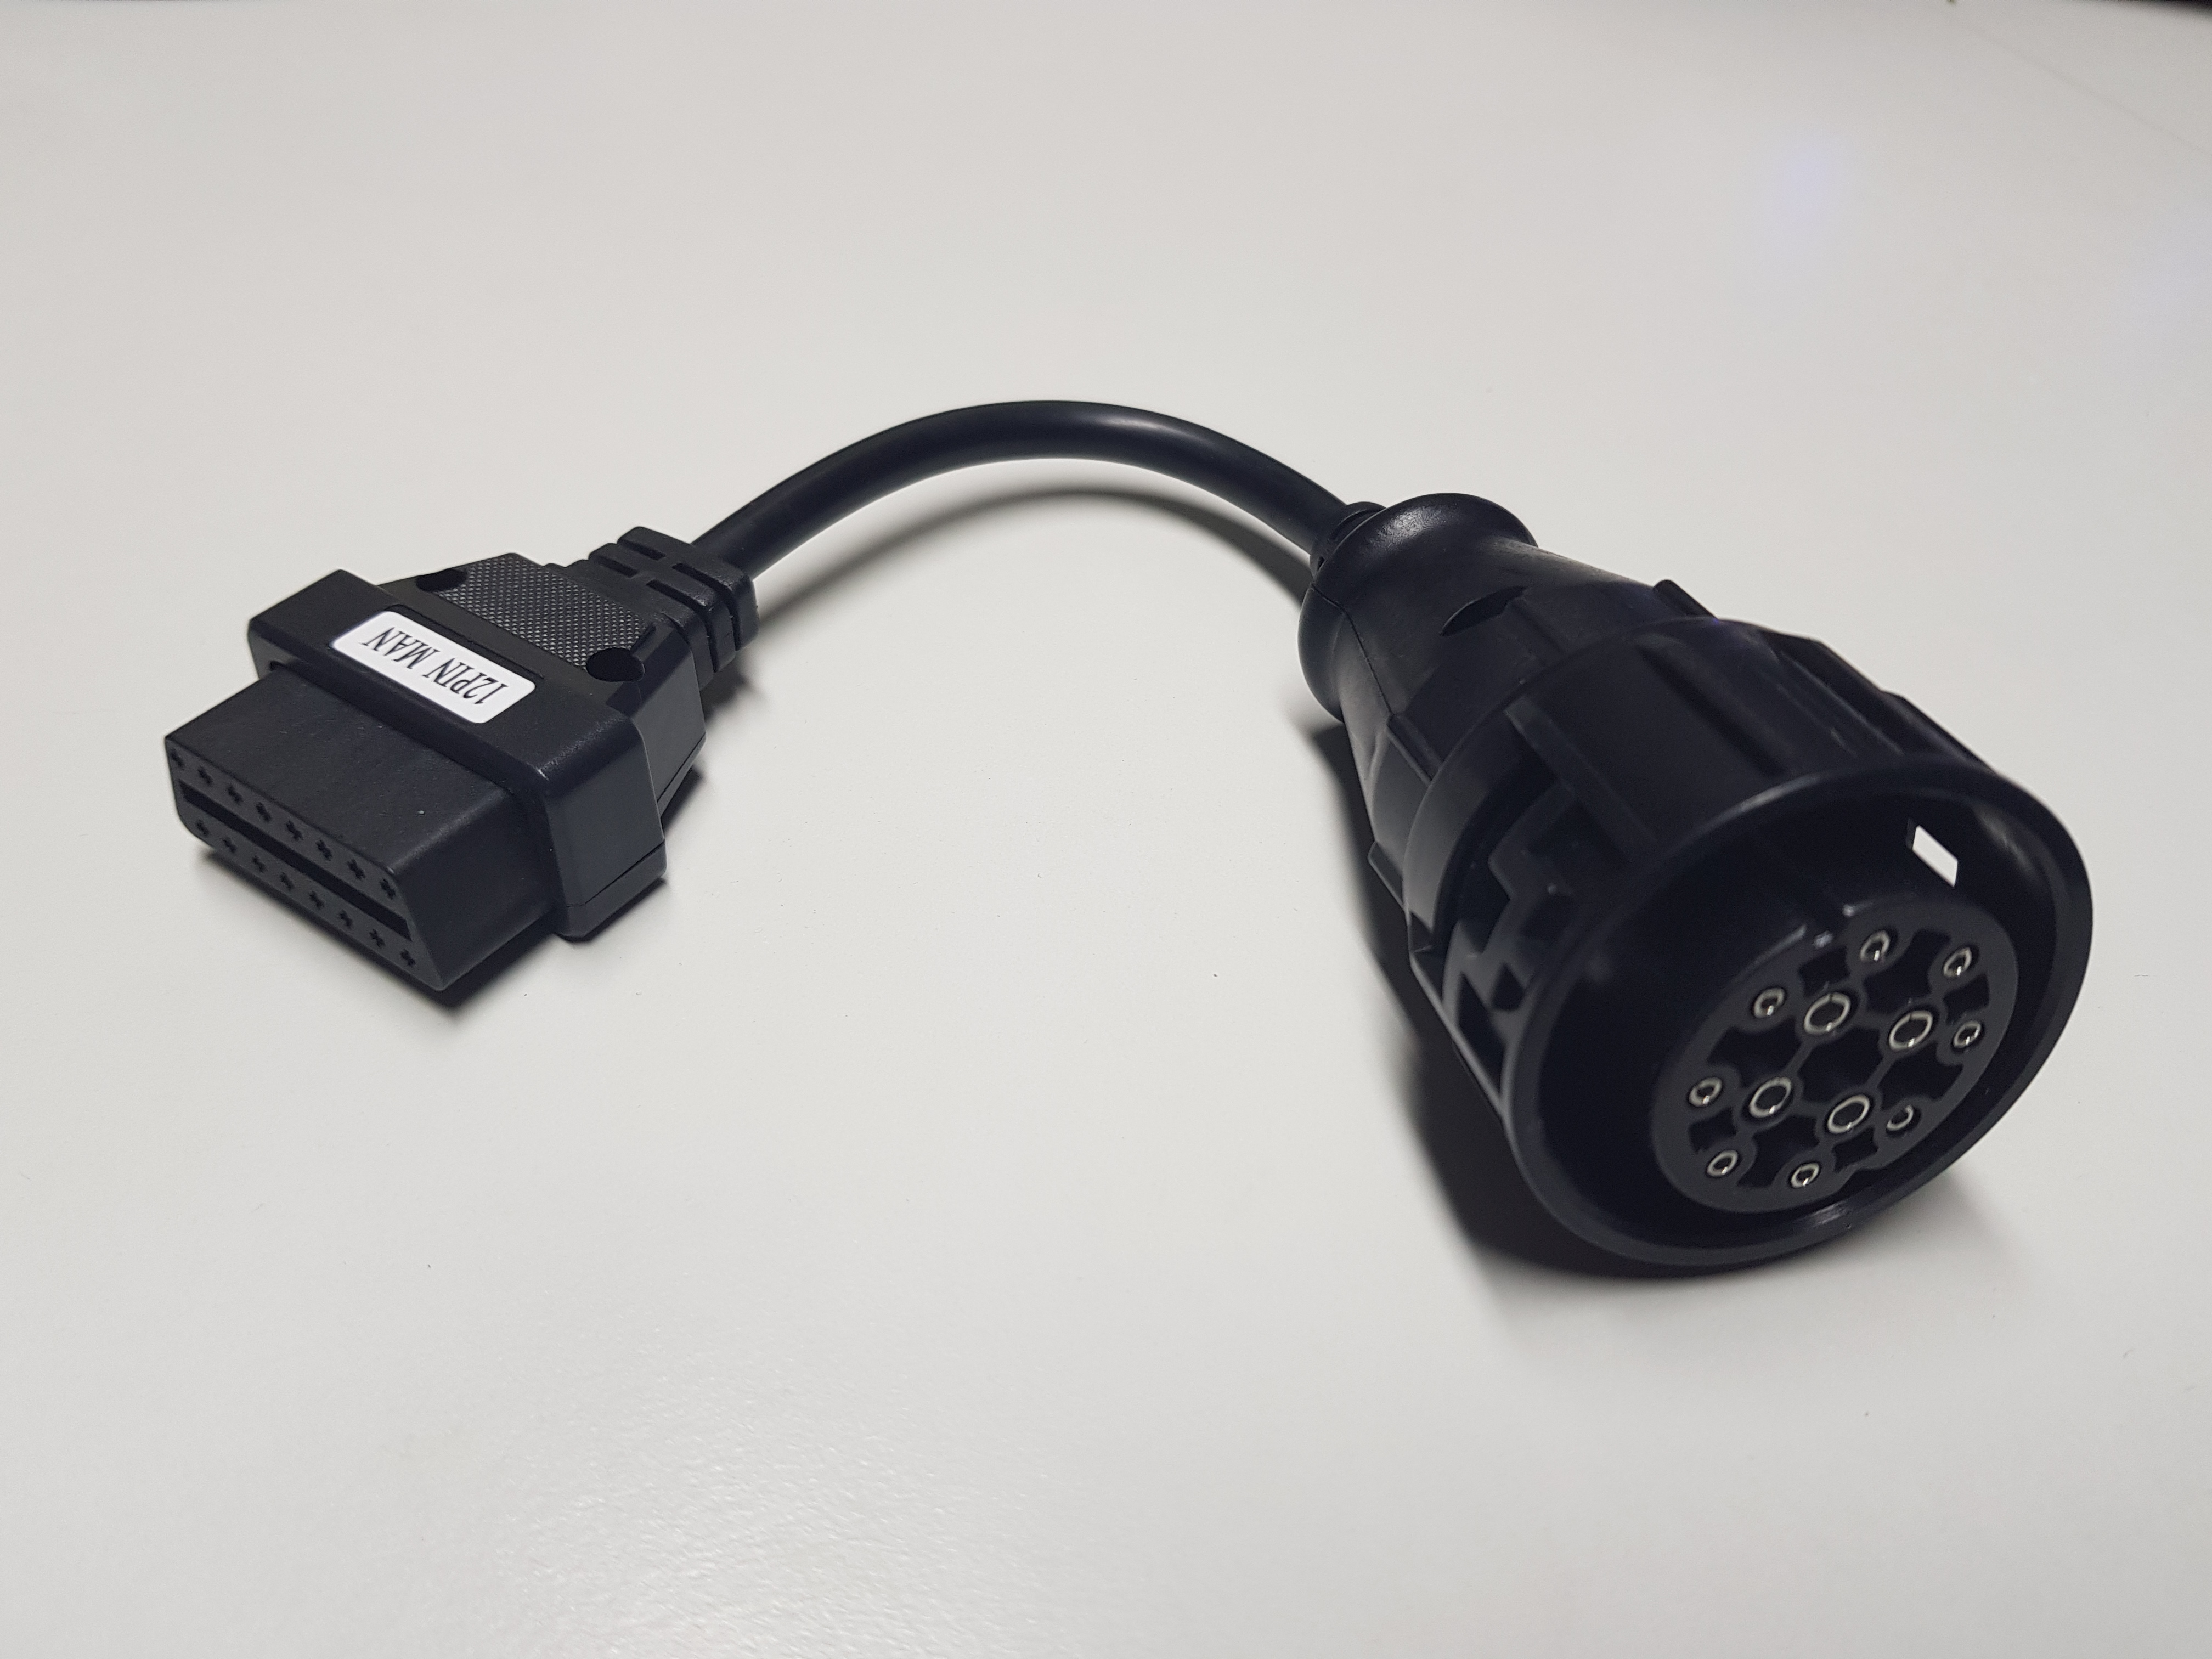 obd pin 7 8 connection in the adapter